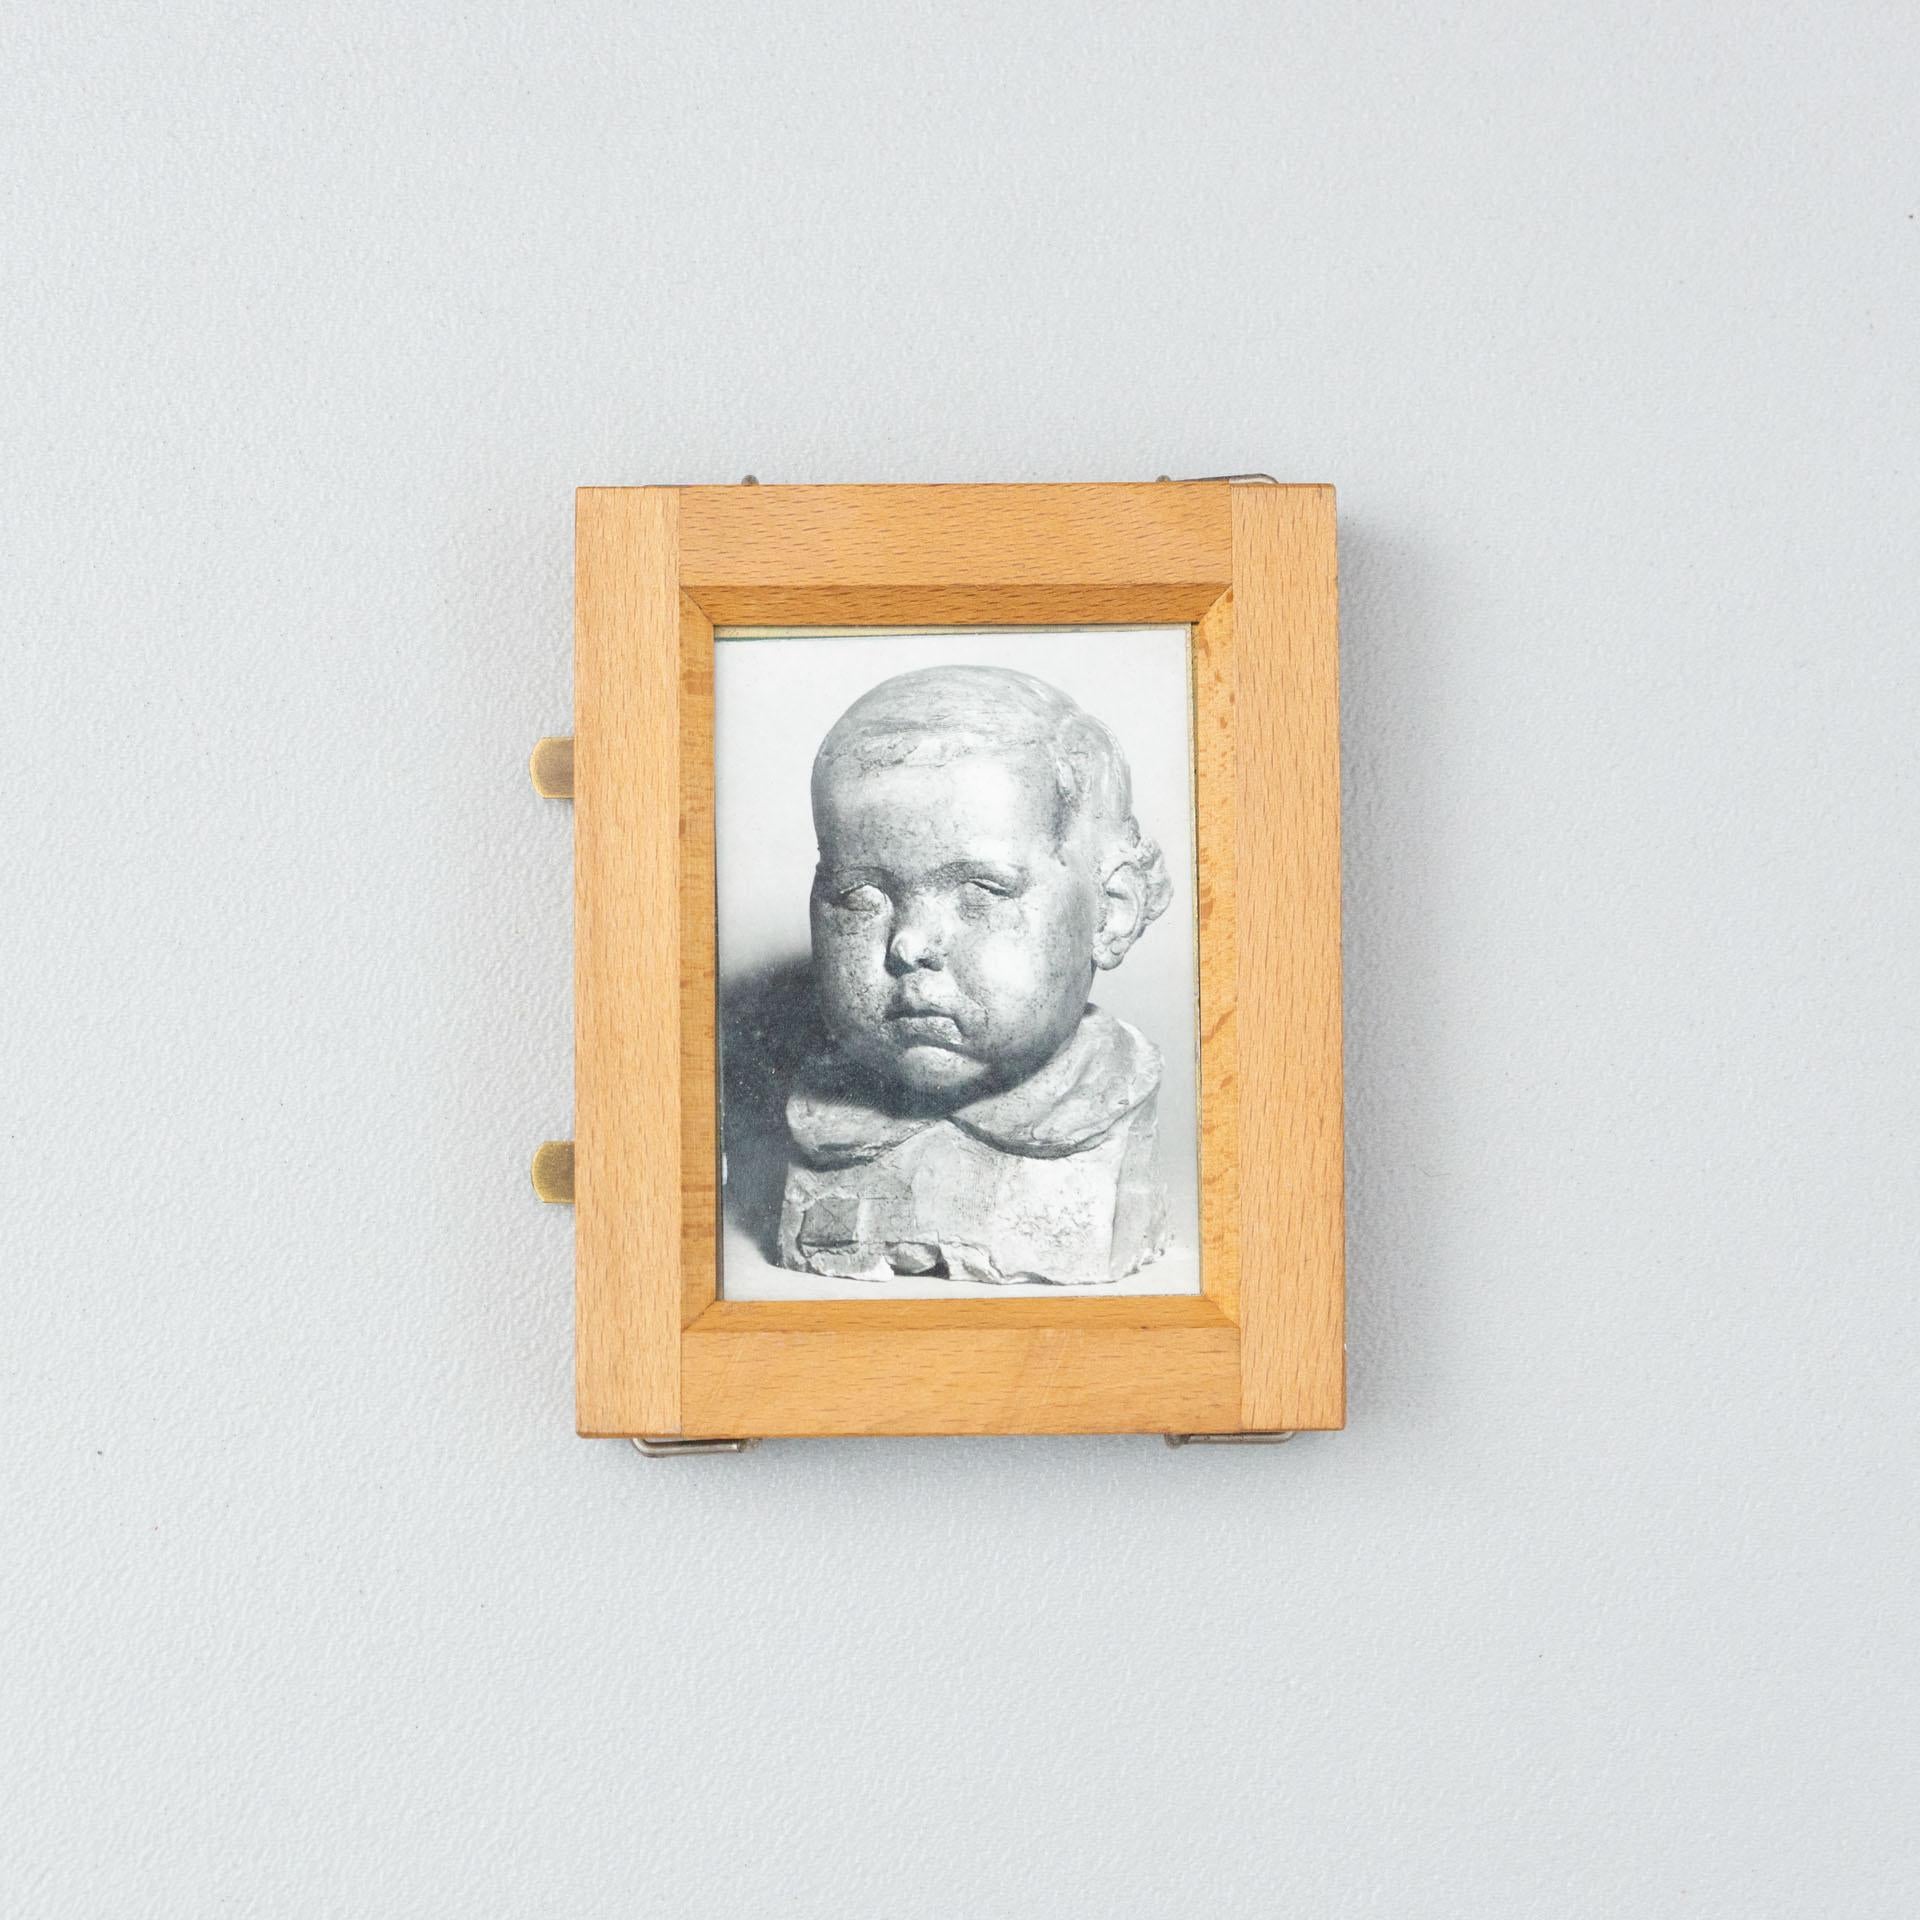 Manolo Hugué archive photography of sculpture.
Printed, circa 1960.
Wood frame included.


Materials:
Gelatin silver bromide print

Dimensions:
D 2.3 cm x W 10 cm x H 12.4 cm

We offer free worldwide shipping for this piece.